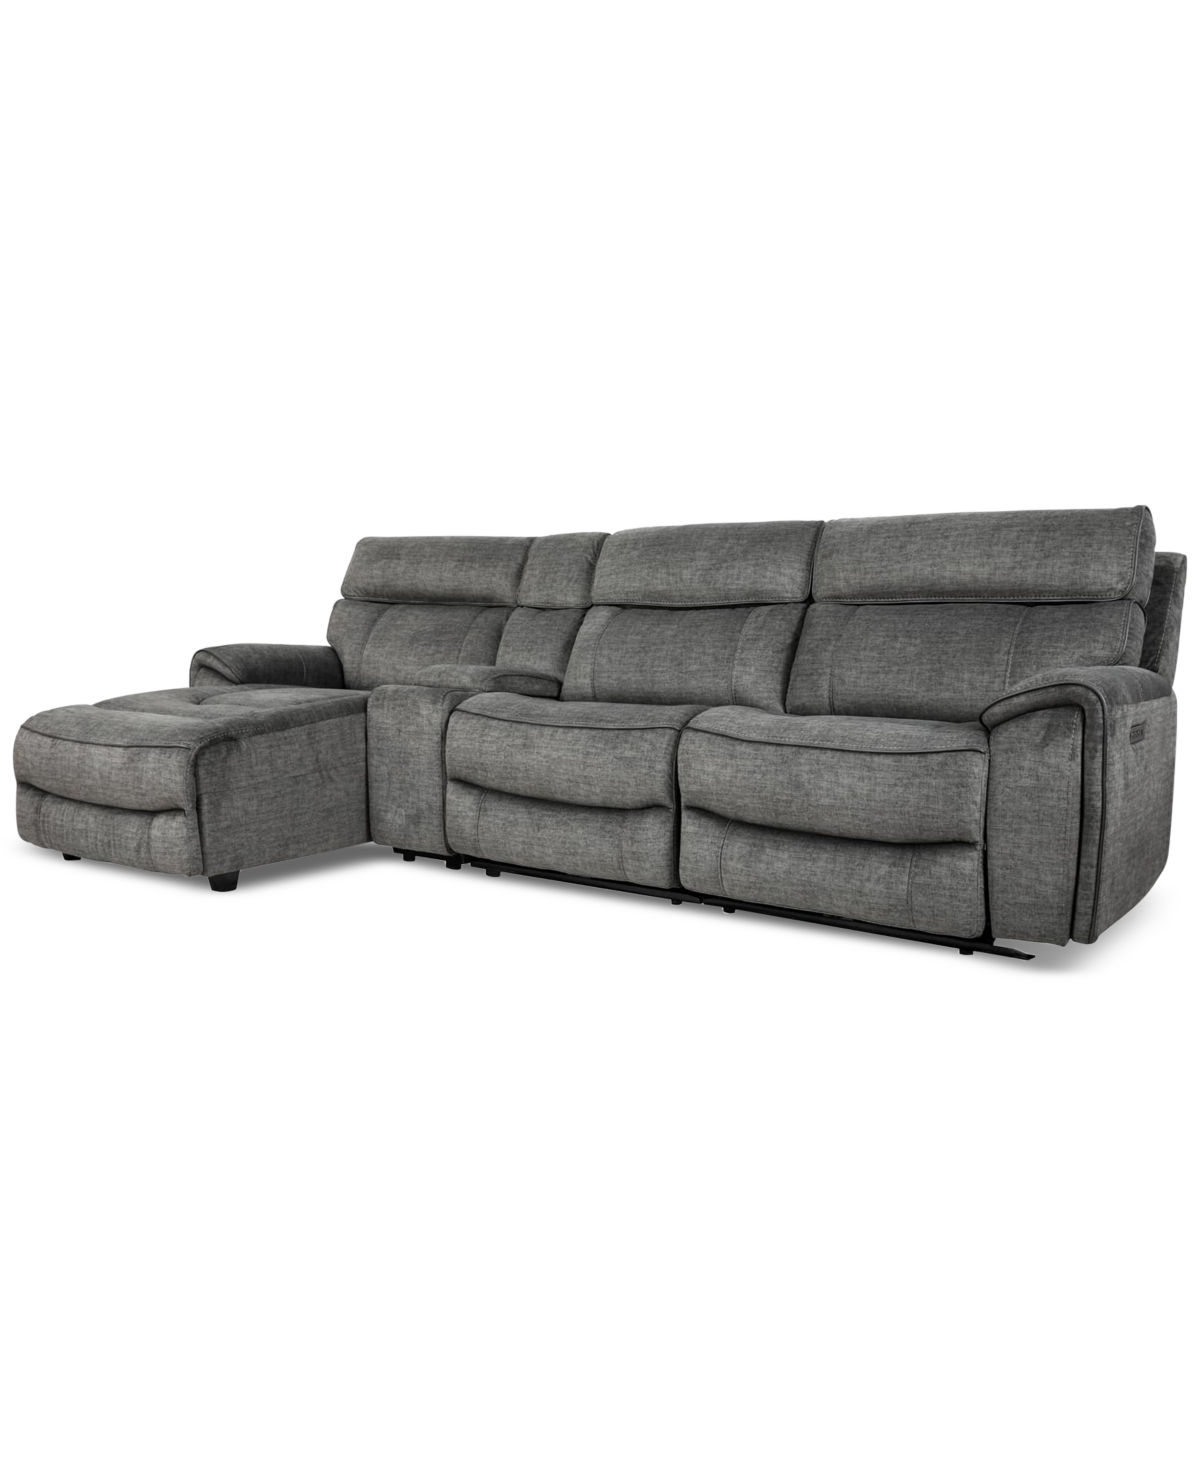 Furniture Hutchenson 4-pc. Fabric Chaise Sectional With 1 Power Recliner, Power Headrest And Console In Charcoal Moss